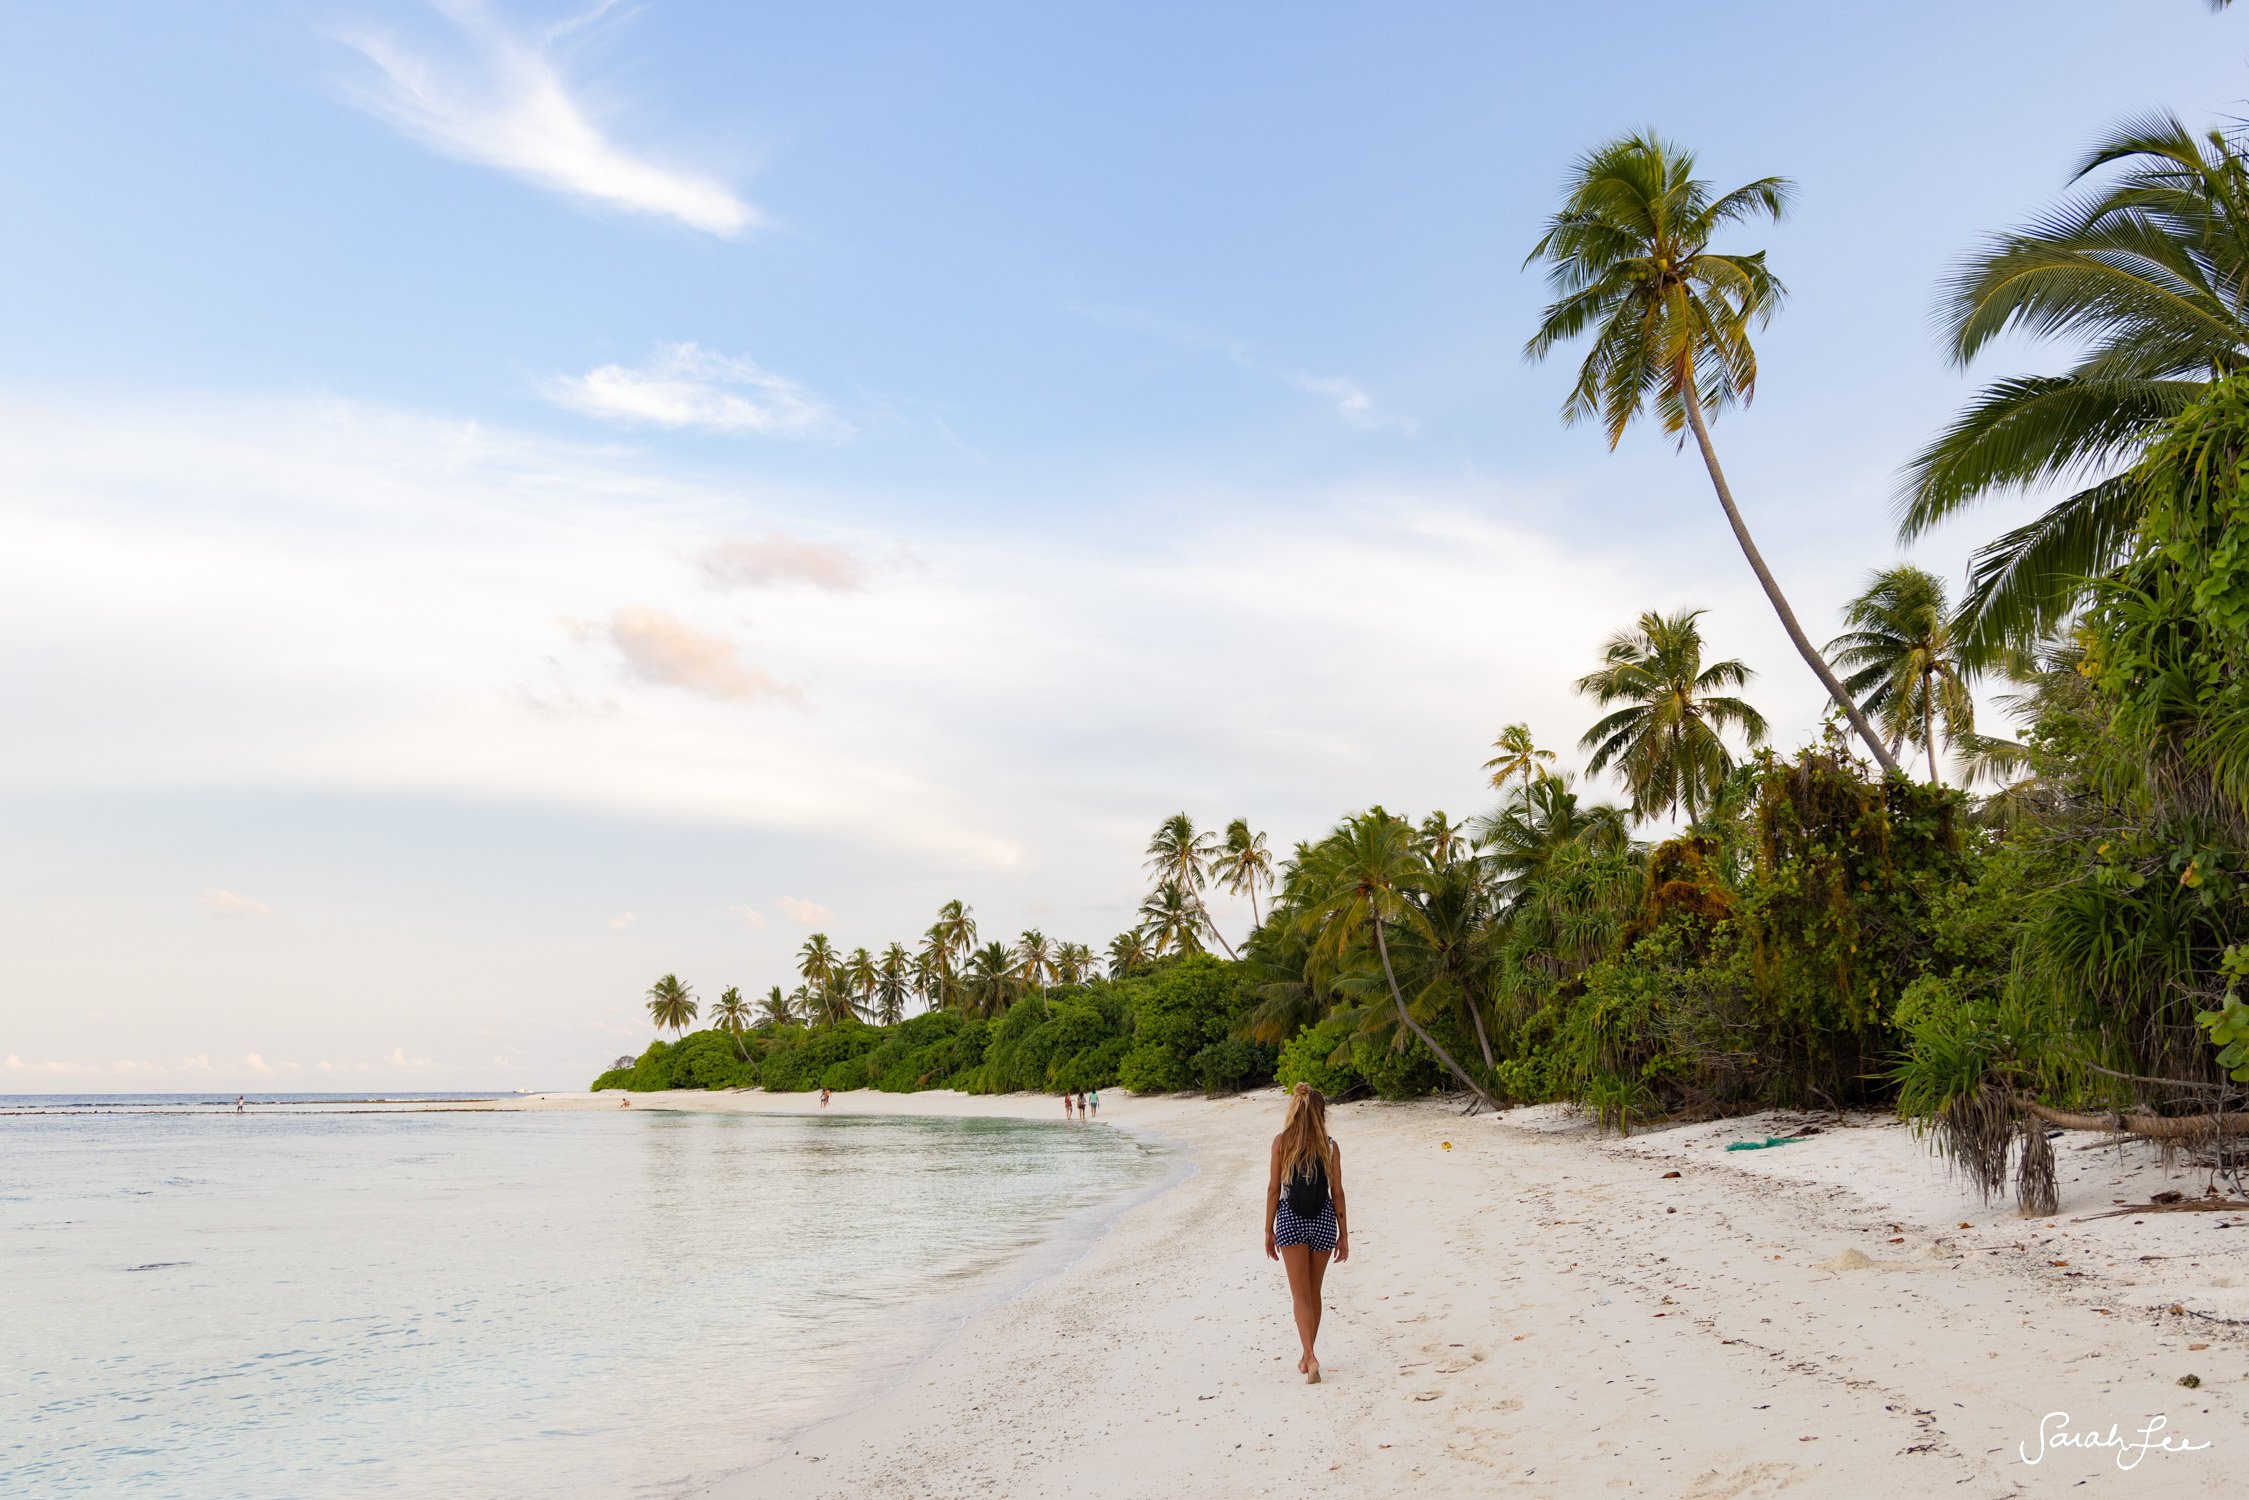 Exploring an empty white sand beach with palm trees in the Maldives